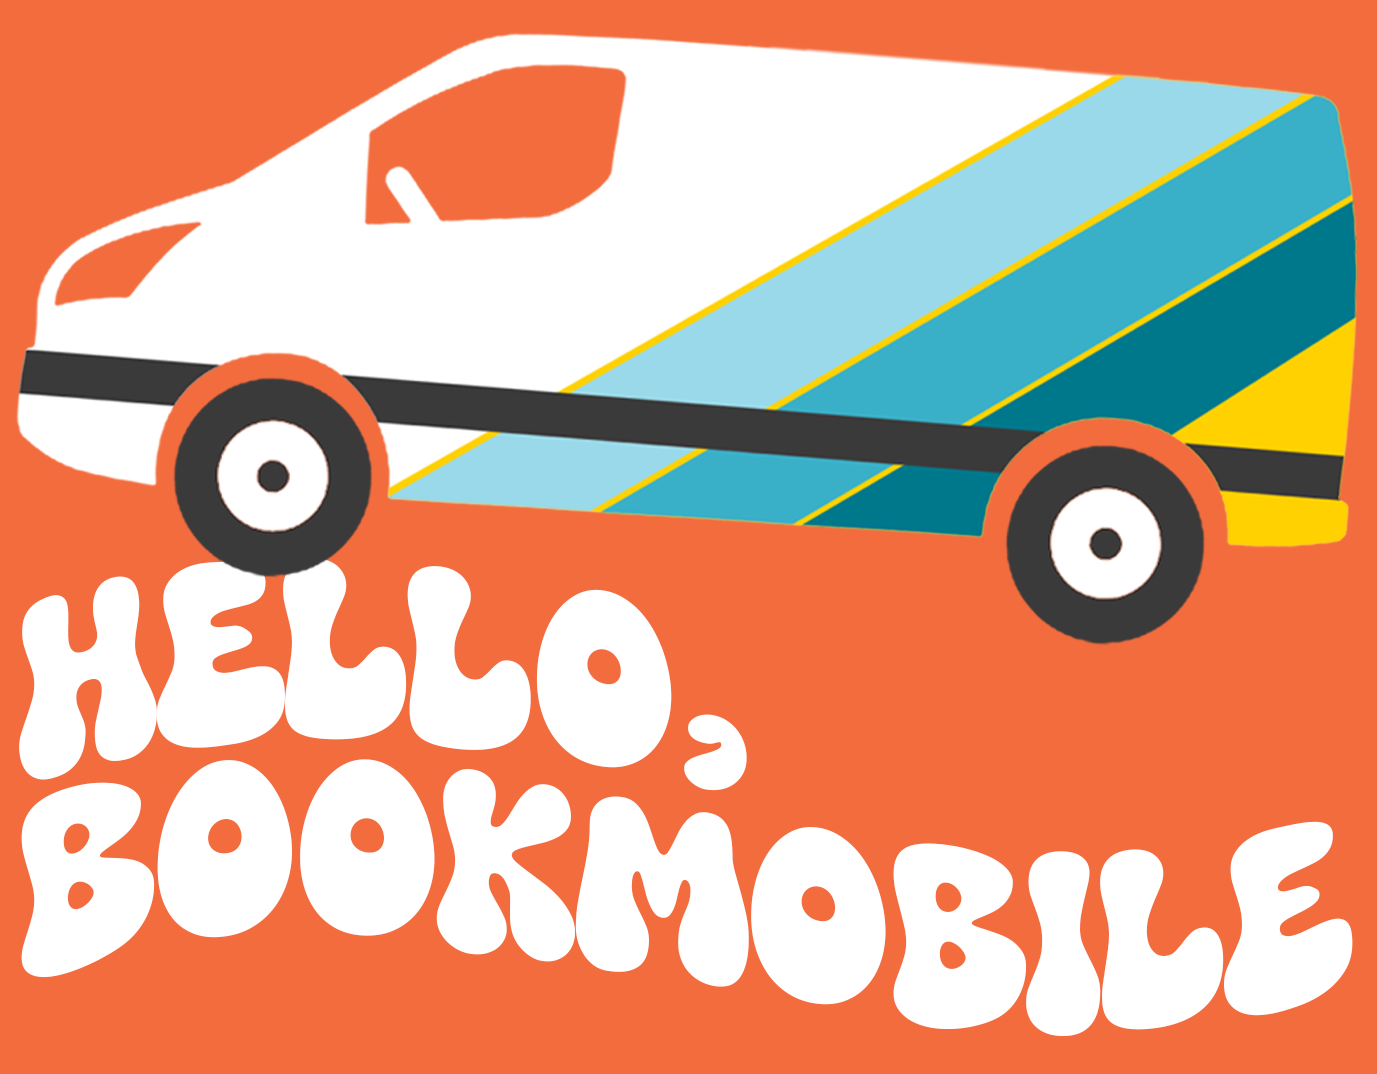 A depiction of the GCL Bookmobile, with "Hello, Bookmobile" spelled out below in groovy font.